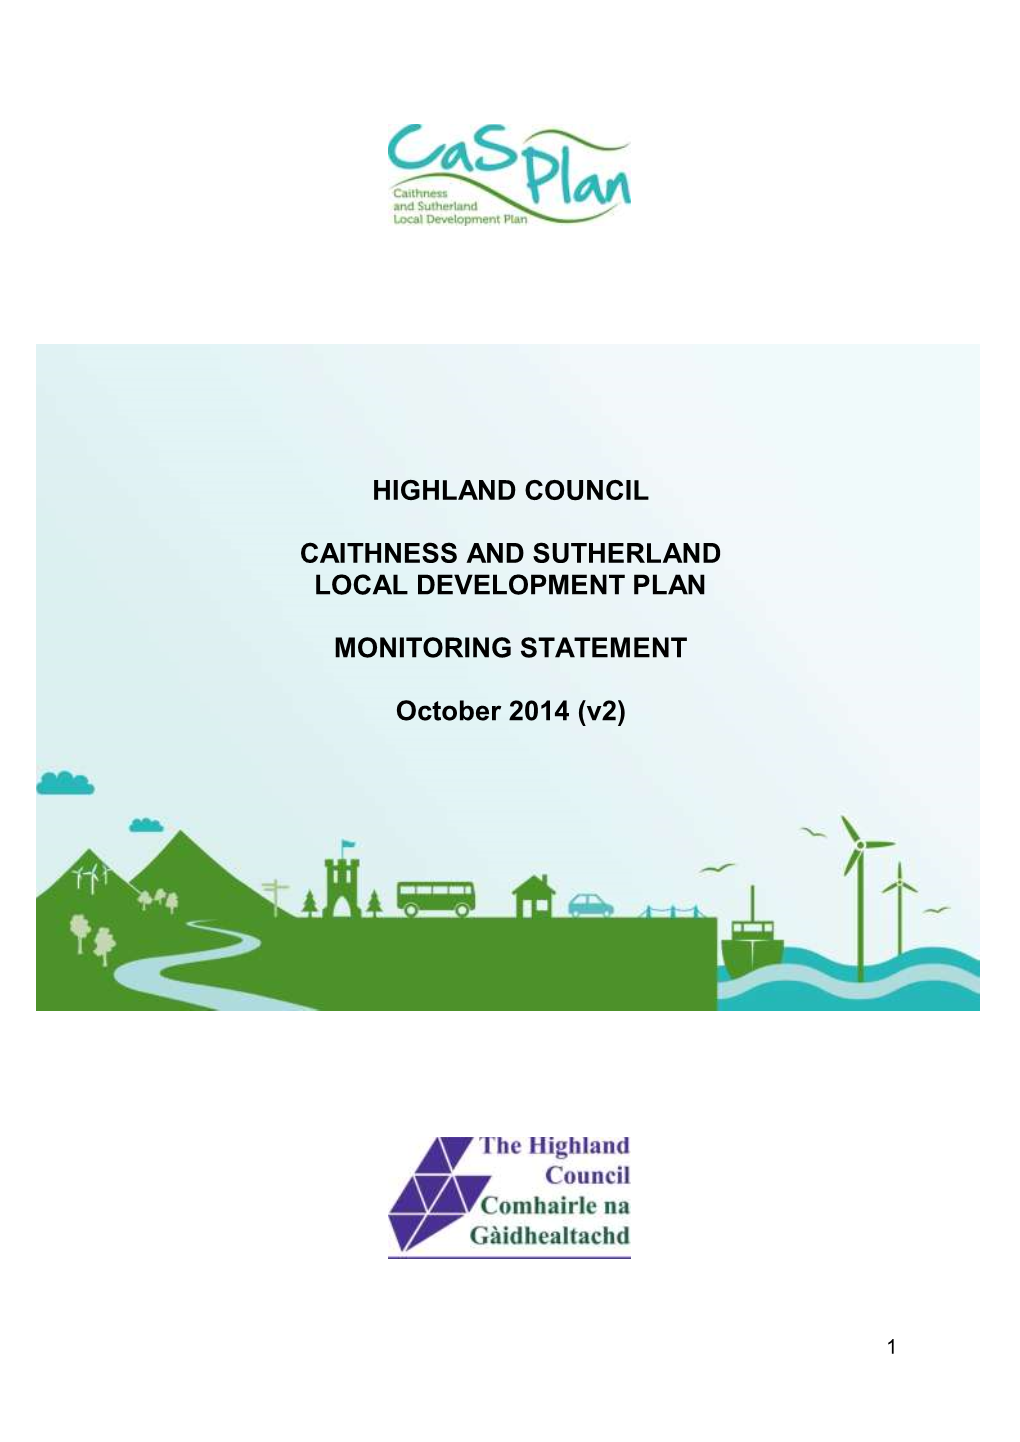 Highland Council Caithness and Sutherland Local